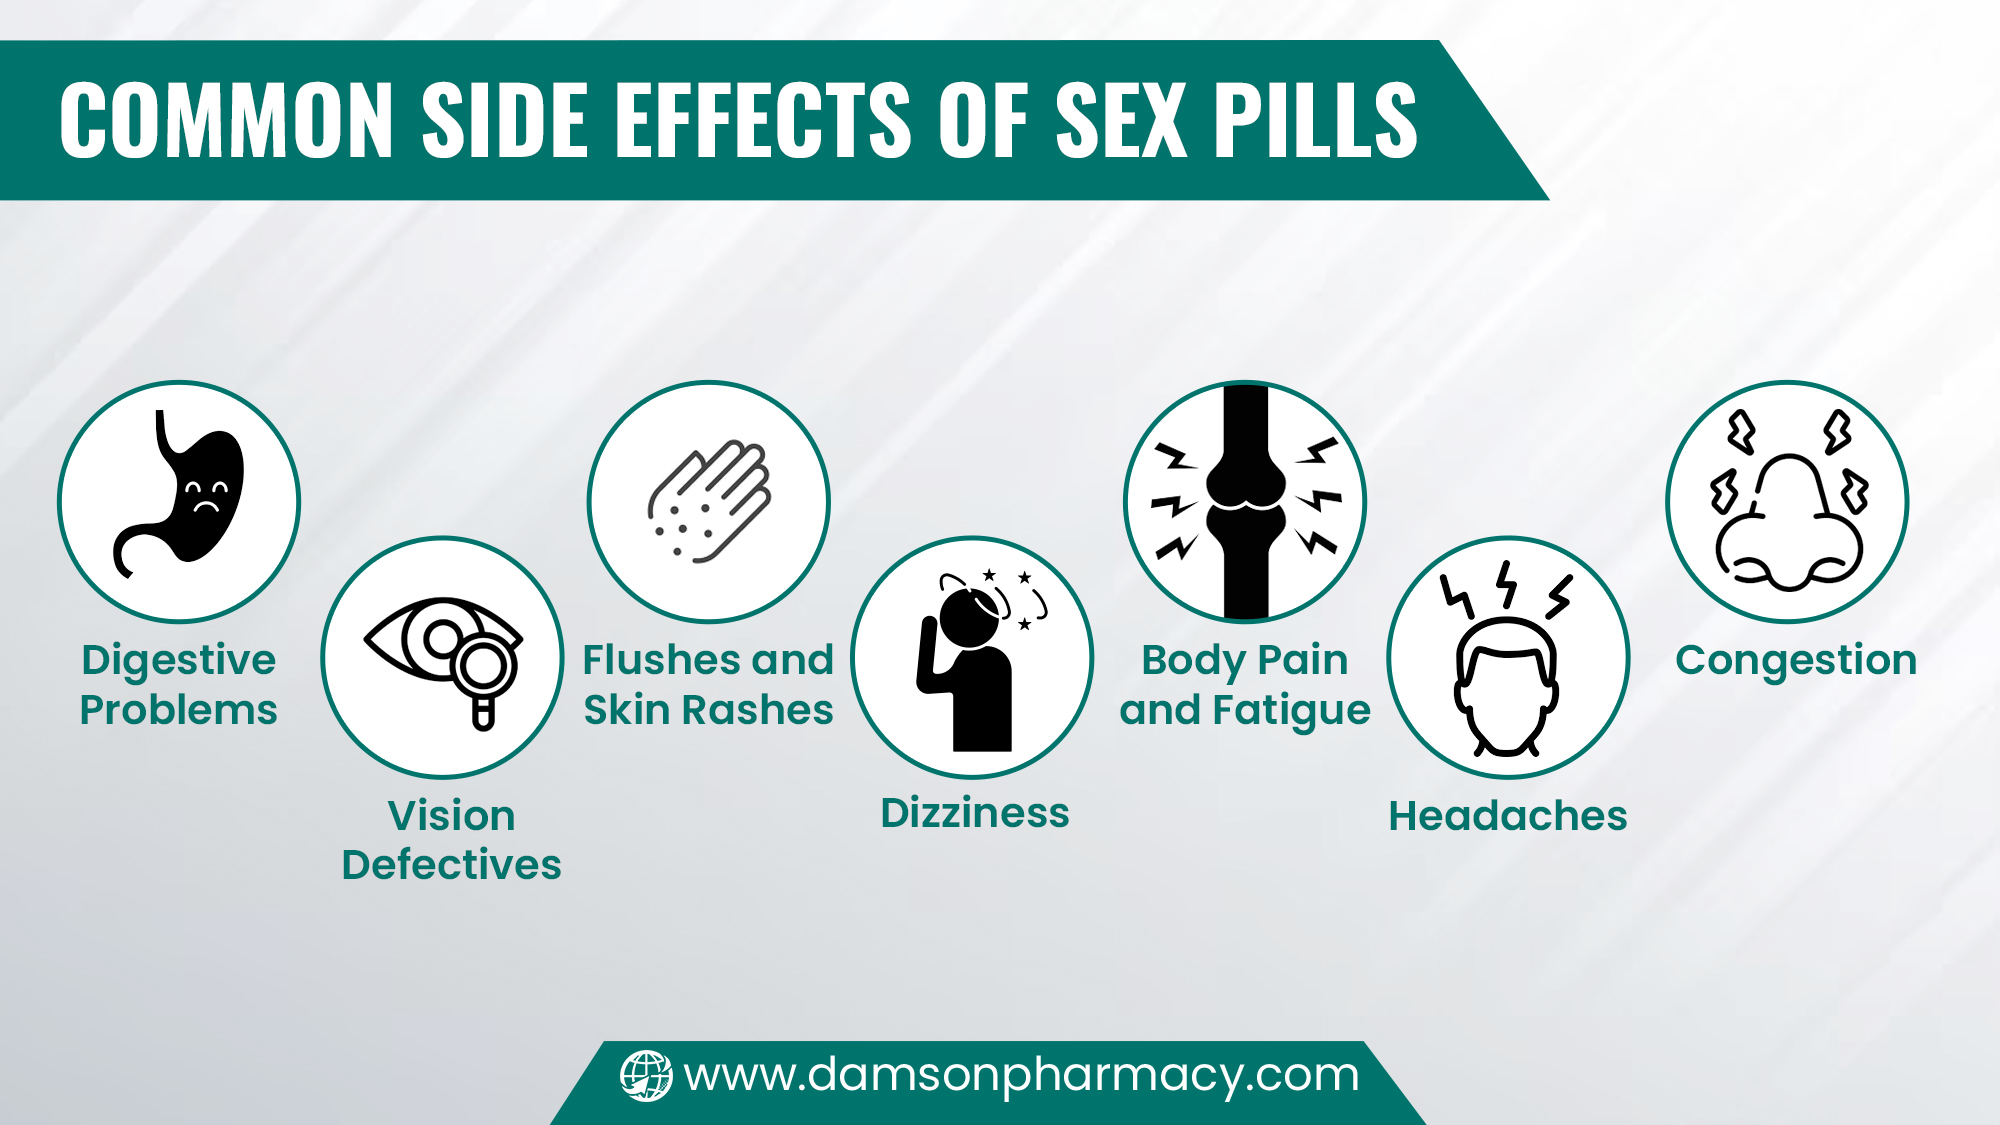 Common Side Effects of Sex Pills